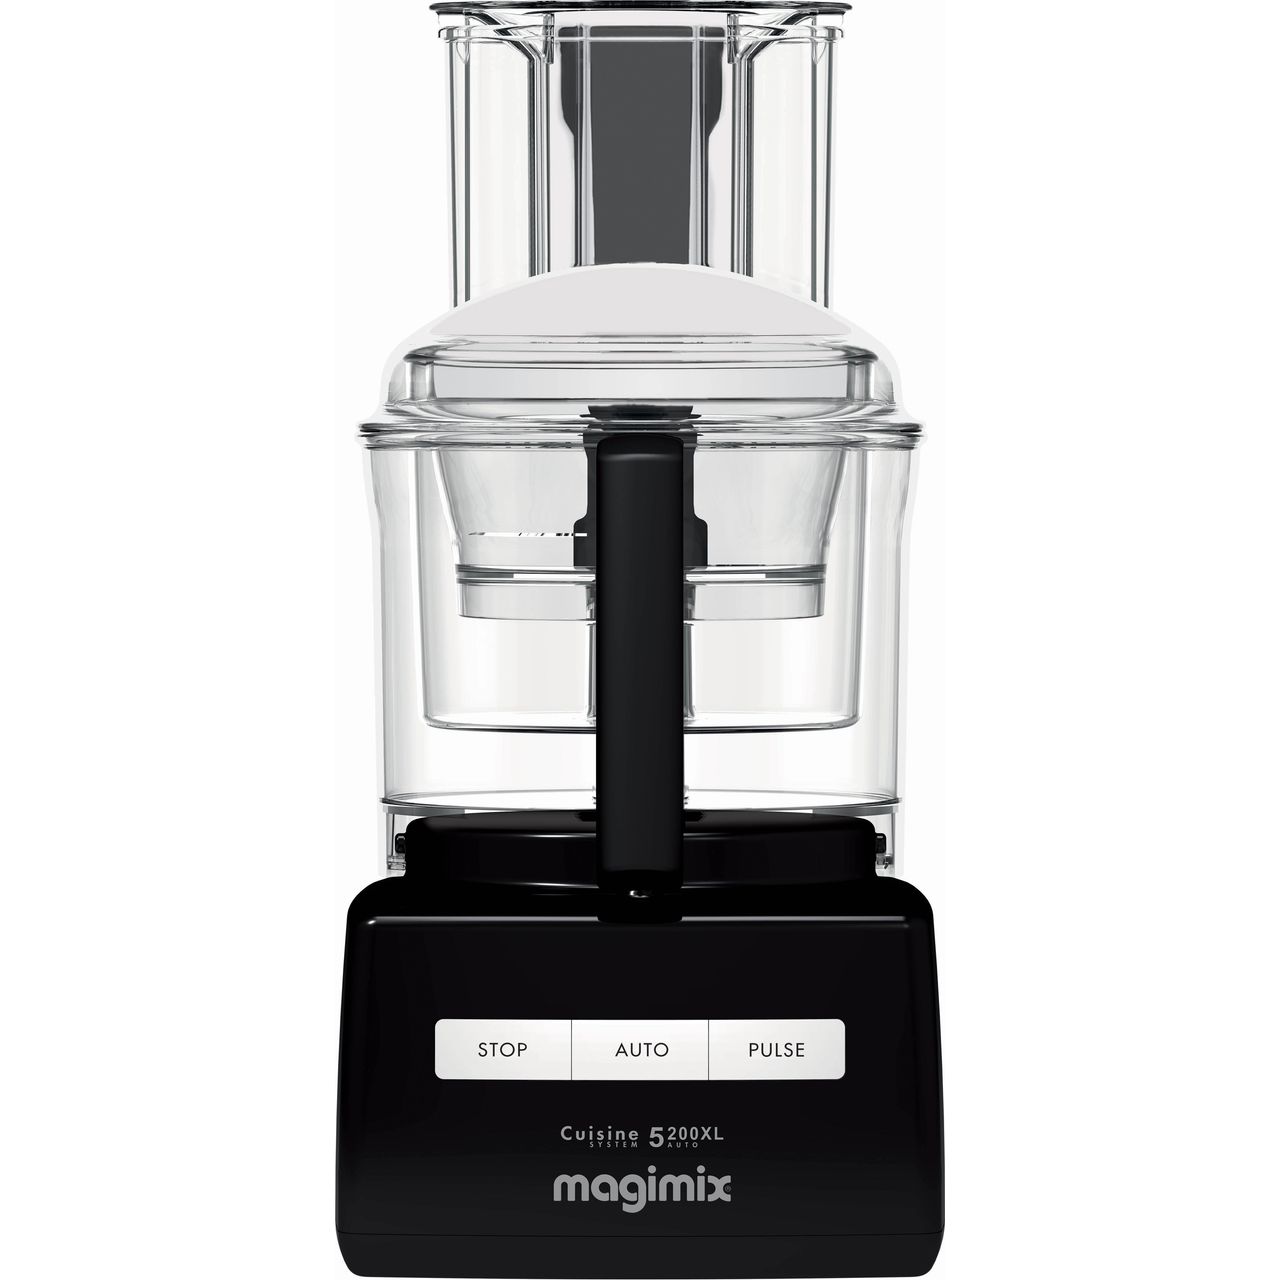 Magimix 5200XL 18584 3.6 Litre Food Processor With 12 Accessories Review